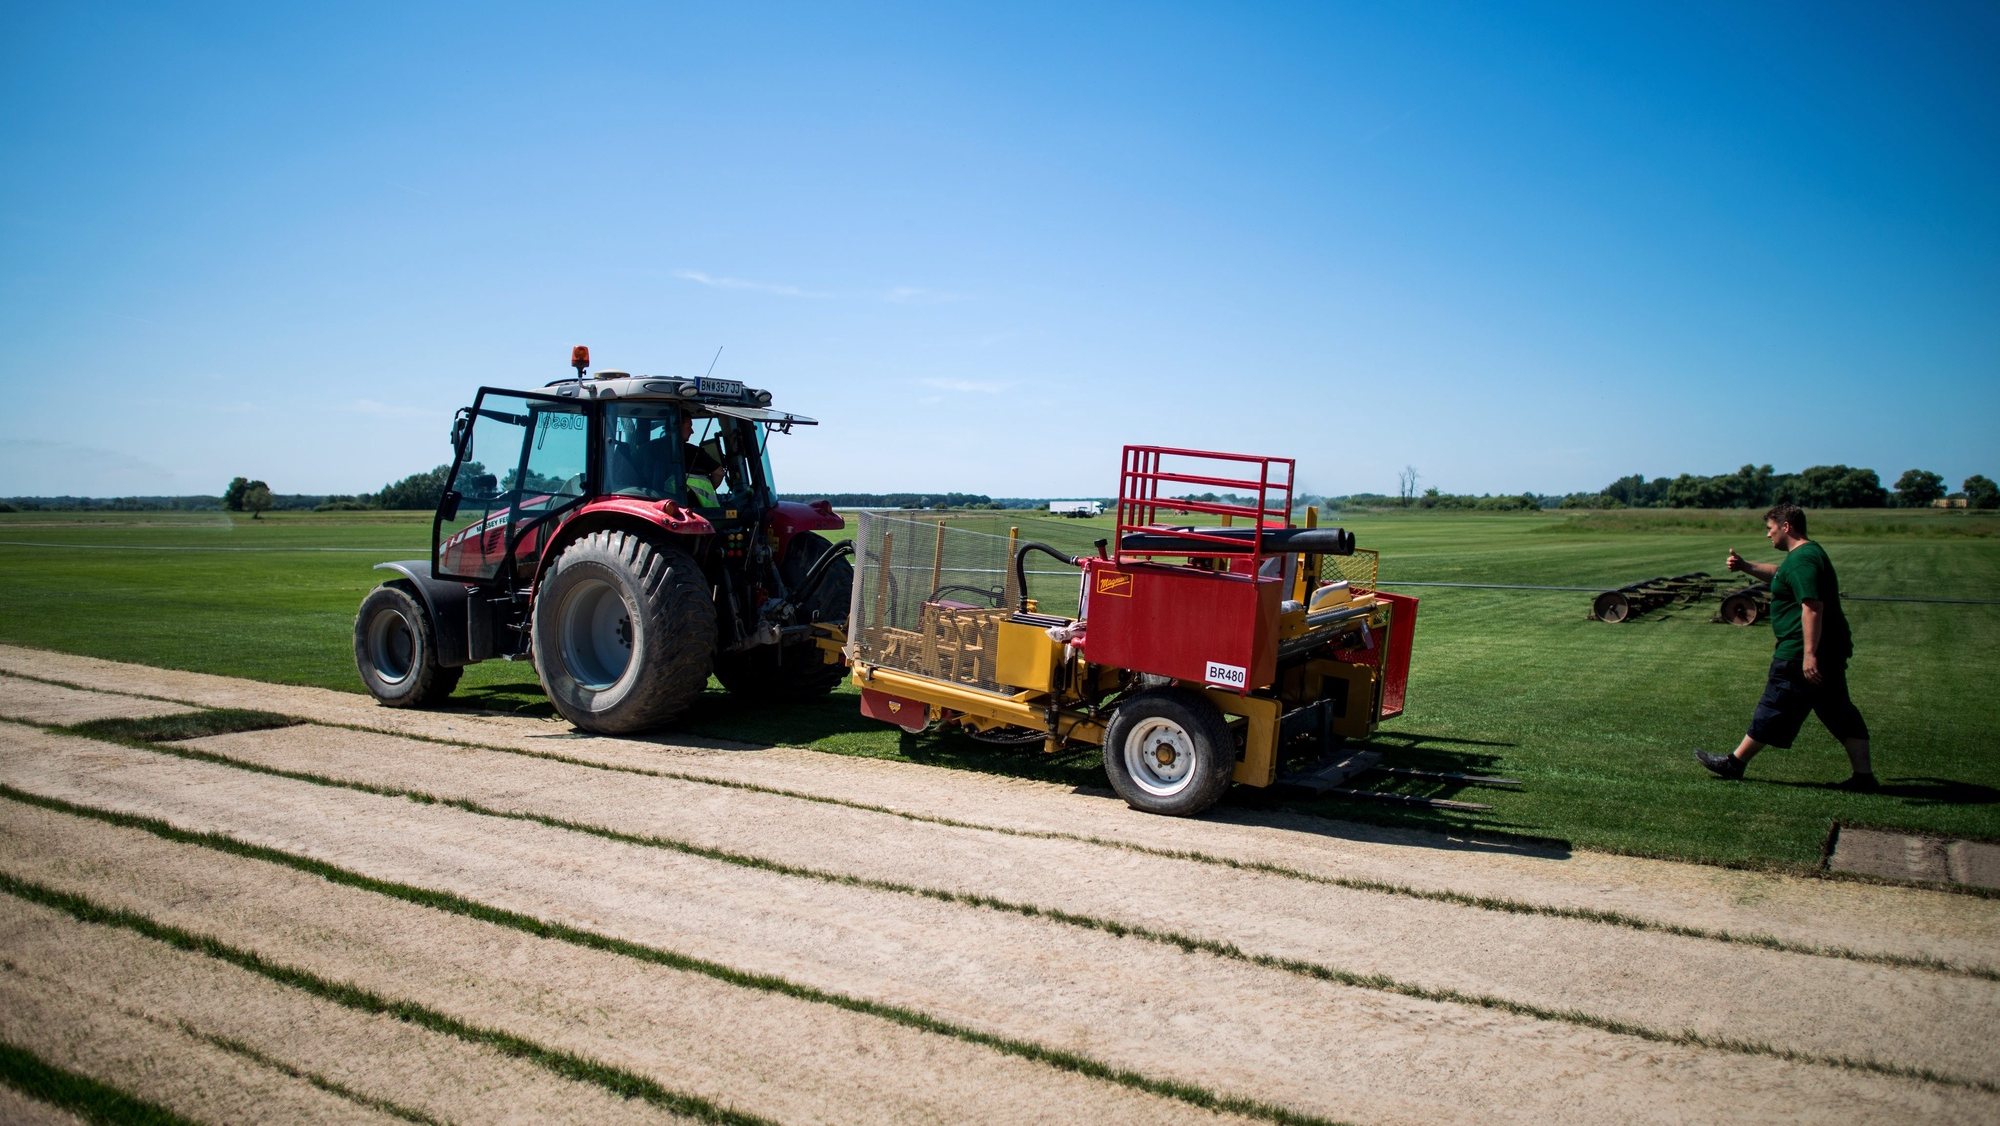 epa05350602 A tractor with a harvester is seen on a sports turf field of turf manufacture Richter Lawn near Zavod, Slovakia, on 07 June 2016. Austrian family business run by the fifth generation, Richter Lawn grows natural turf in Austria and Slovakia. Their special stadium turf lawn, grown on silica sand natural soil, was sodded for the UEFA Champions League Final 2015 in Berlin, Germany, the EURO 2012 in Kiev, Lviv and Donetsk, Ukraine and the EURO 2016 in Nice, Lille and Marseille, France.  EPA/CHRISTIAN BRUNA